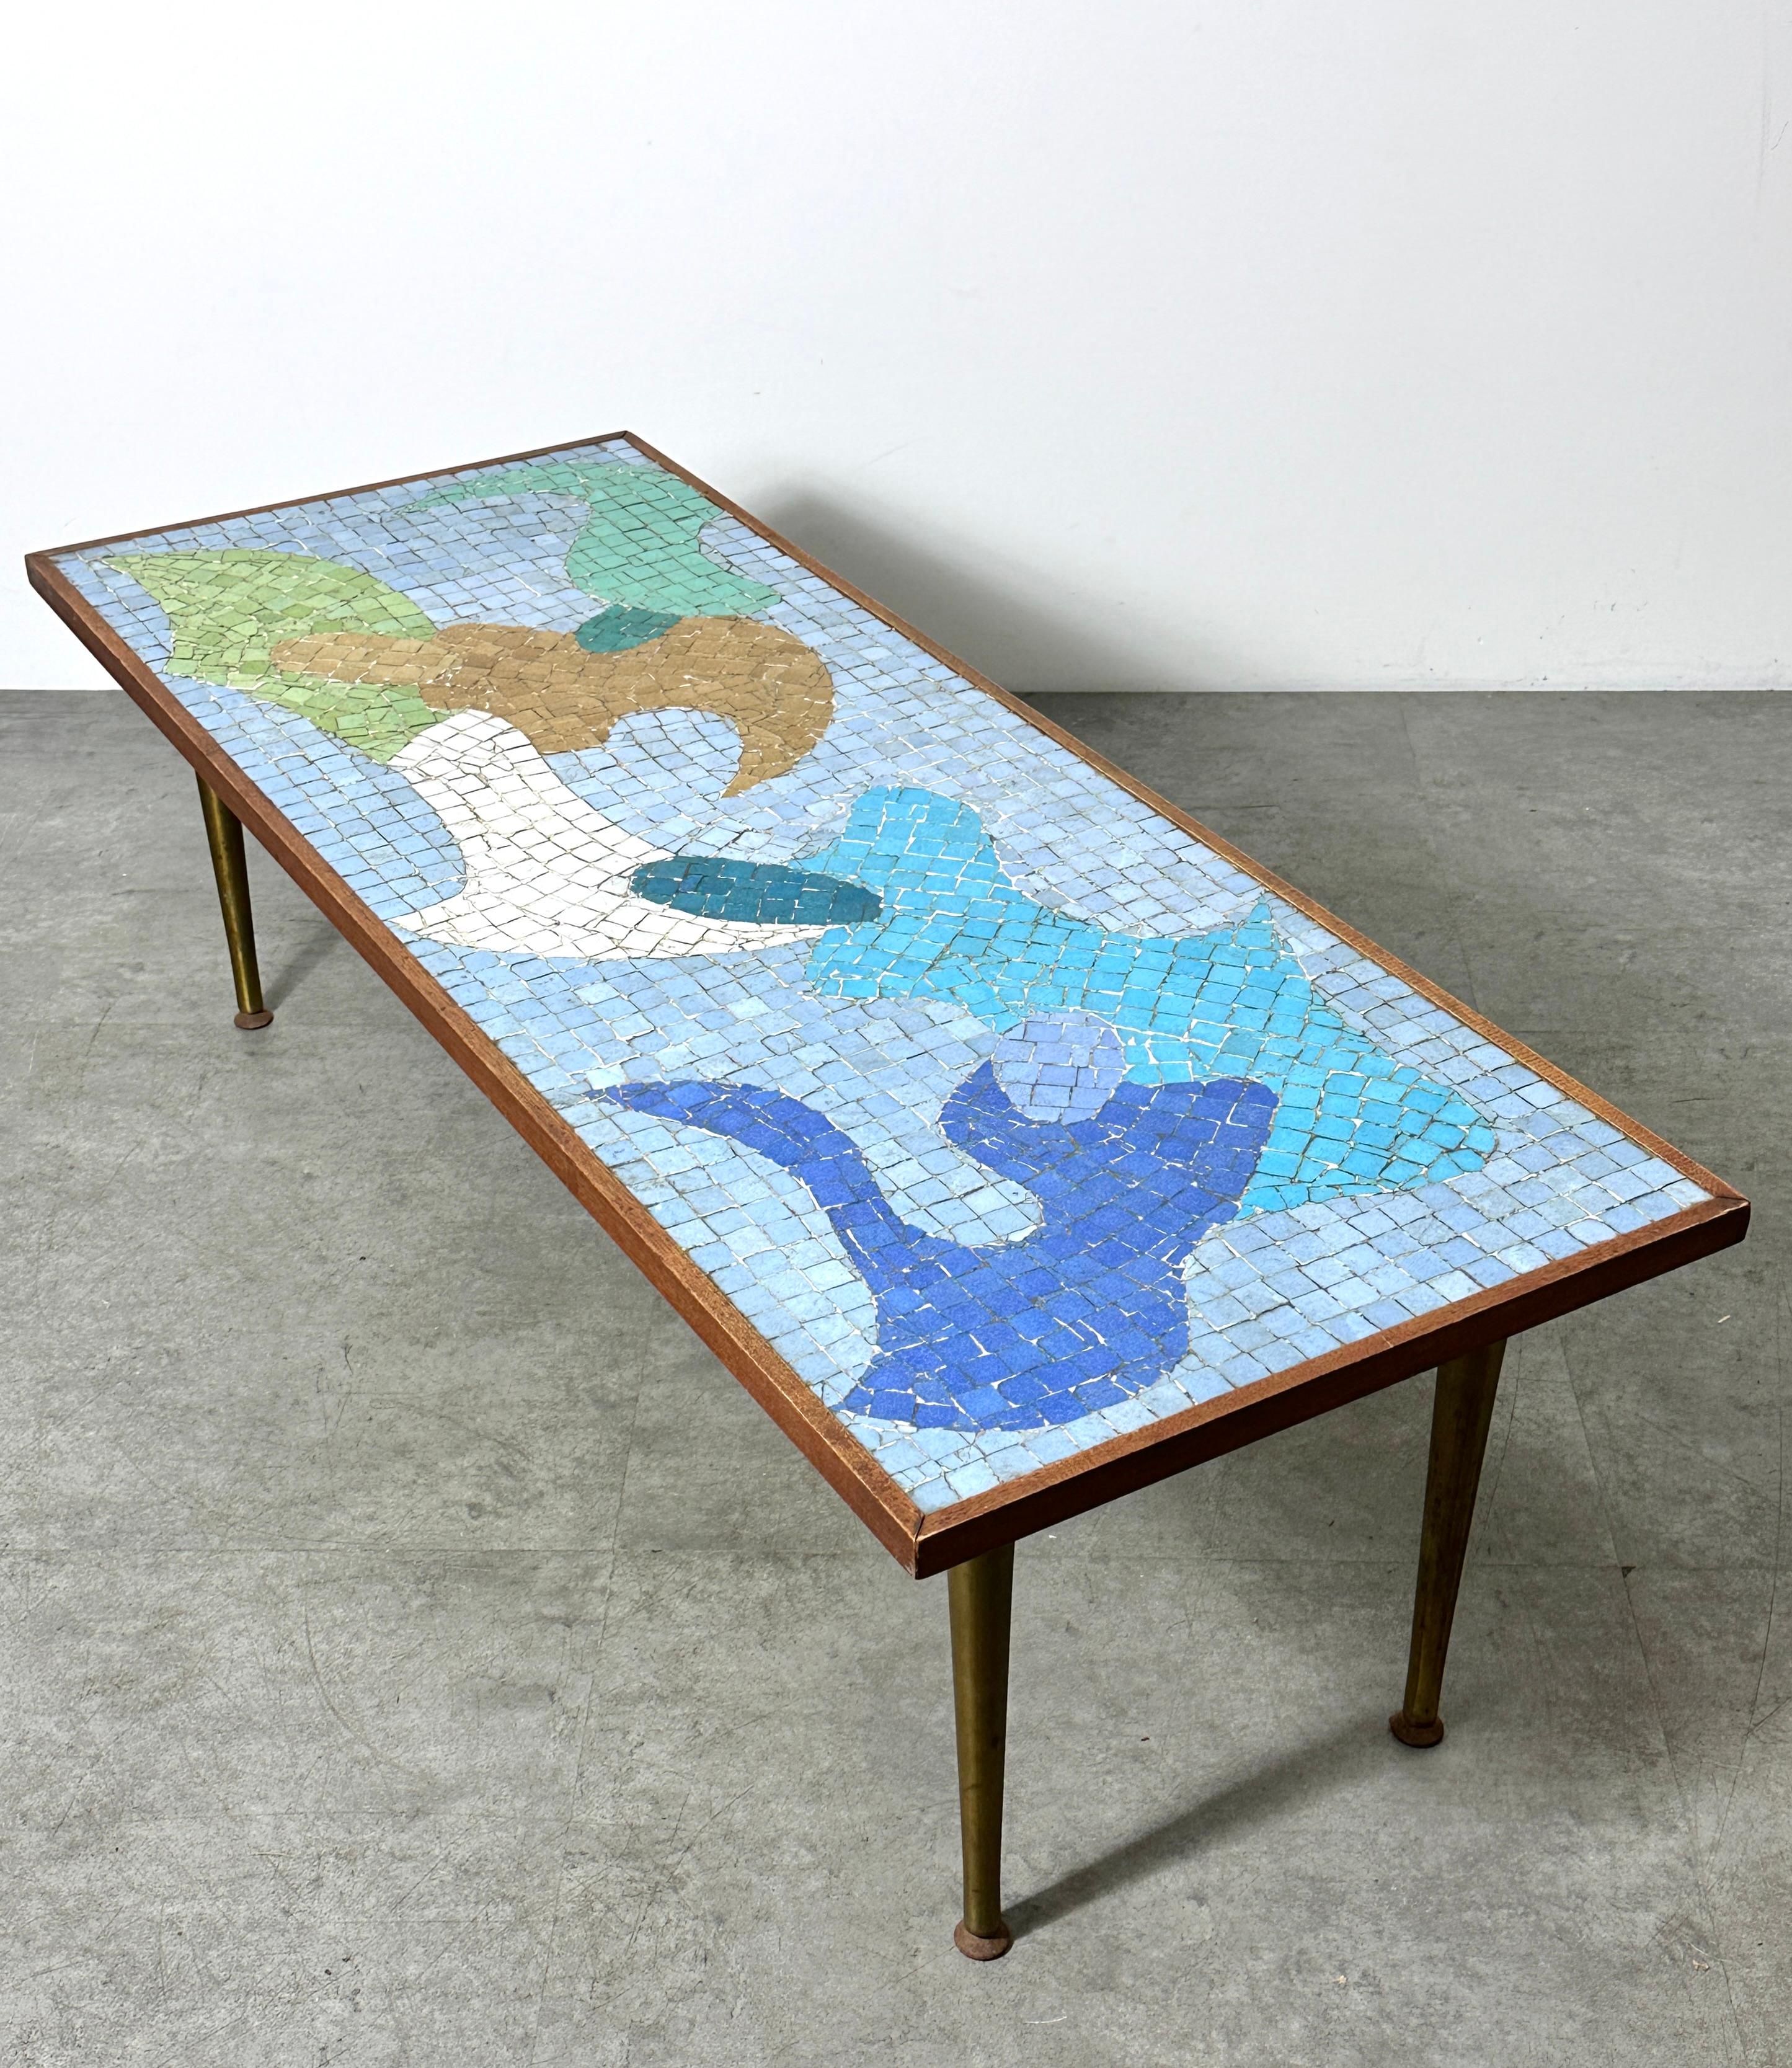 20th Century Mid Century Modern Abstract Mosaic Tile Top Brass Coffee Table 1950s